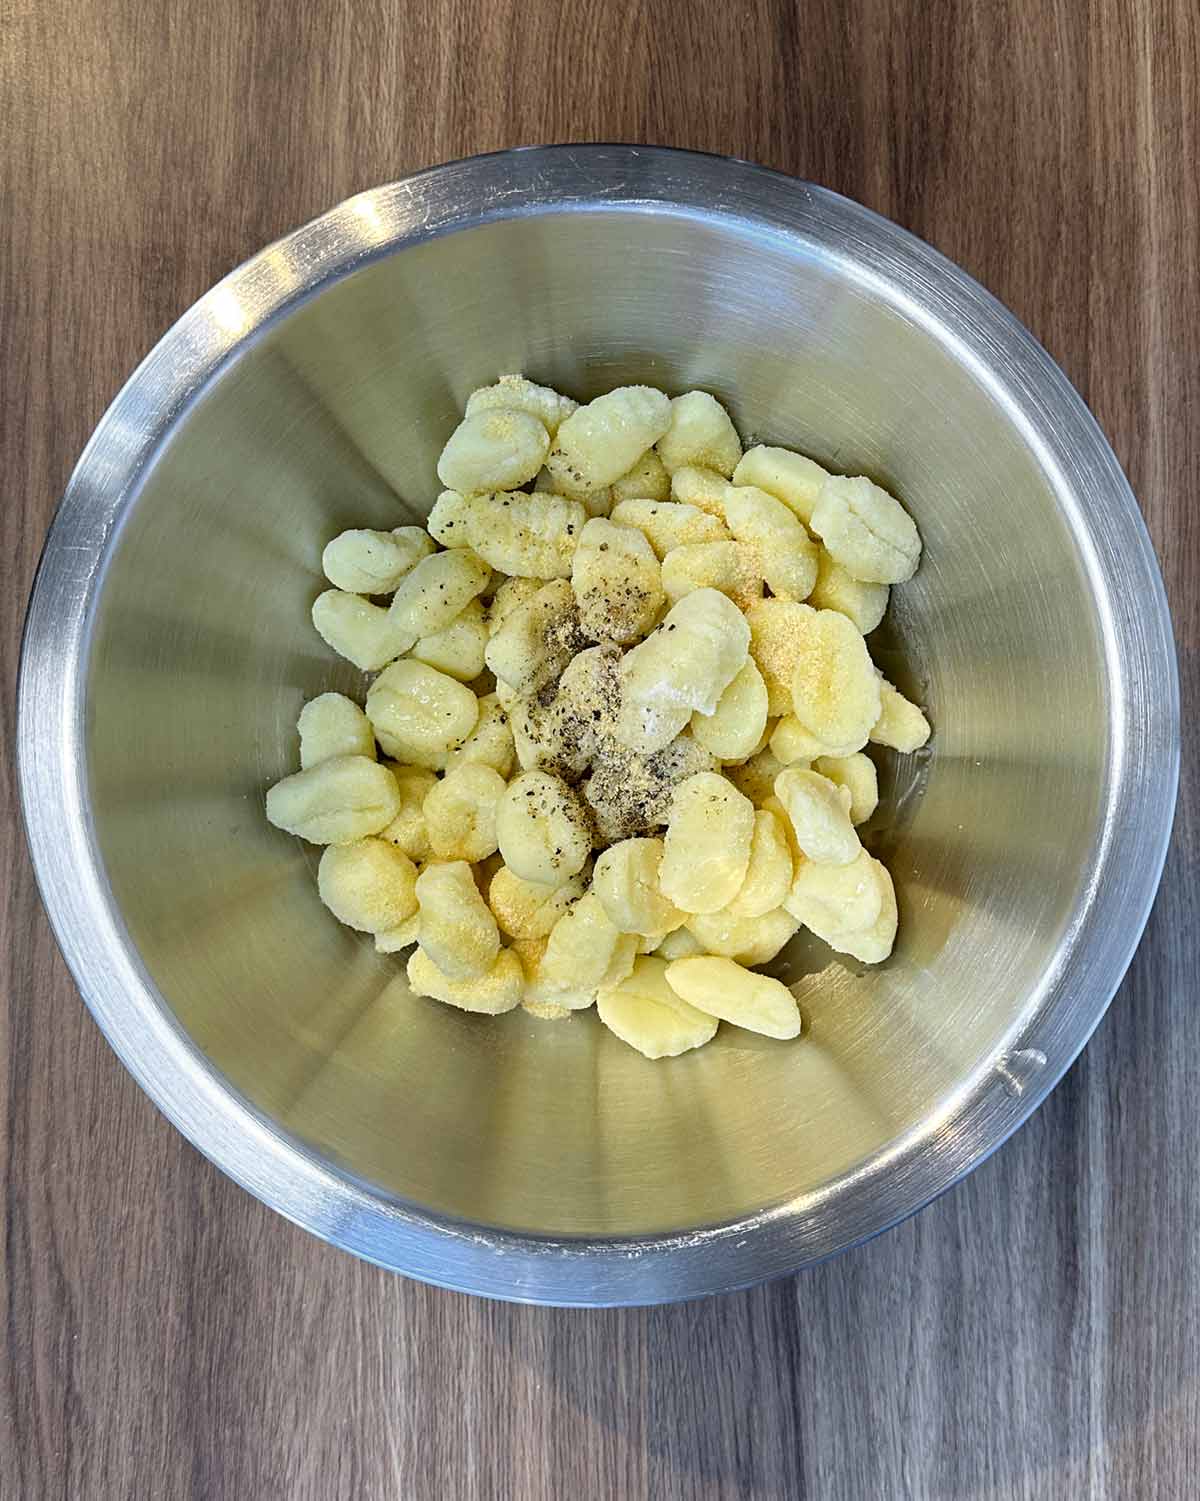 A bowl of uncooked gnocchi with oil and seasoning.